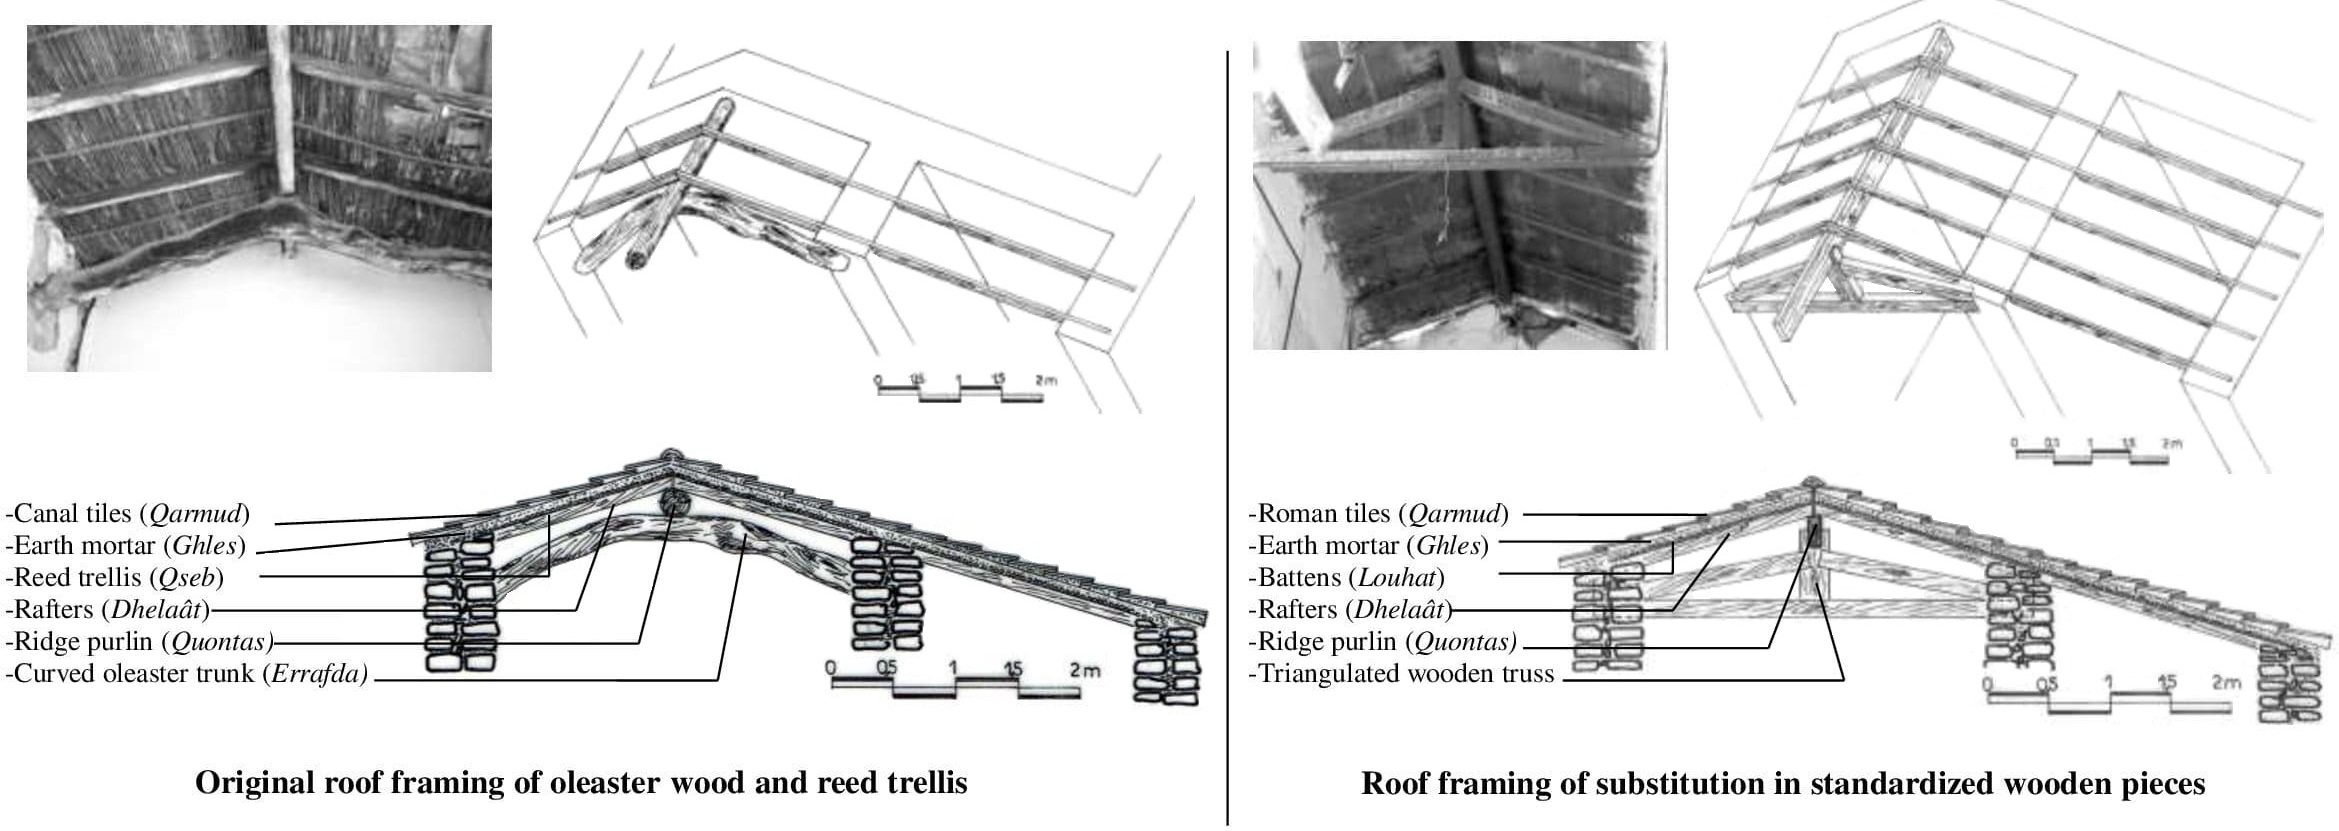 Variants of roofs